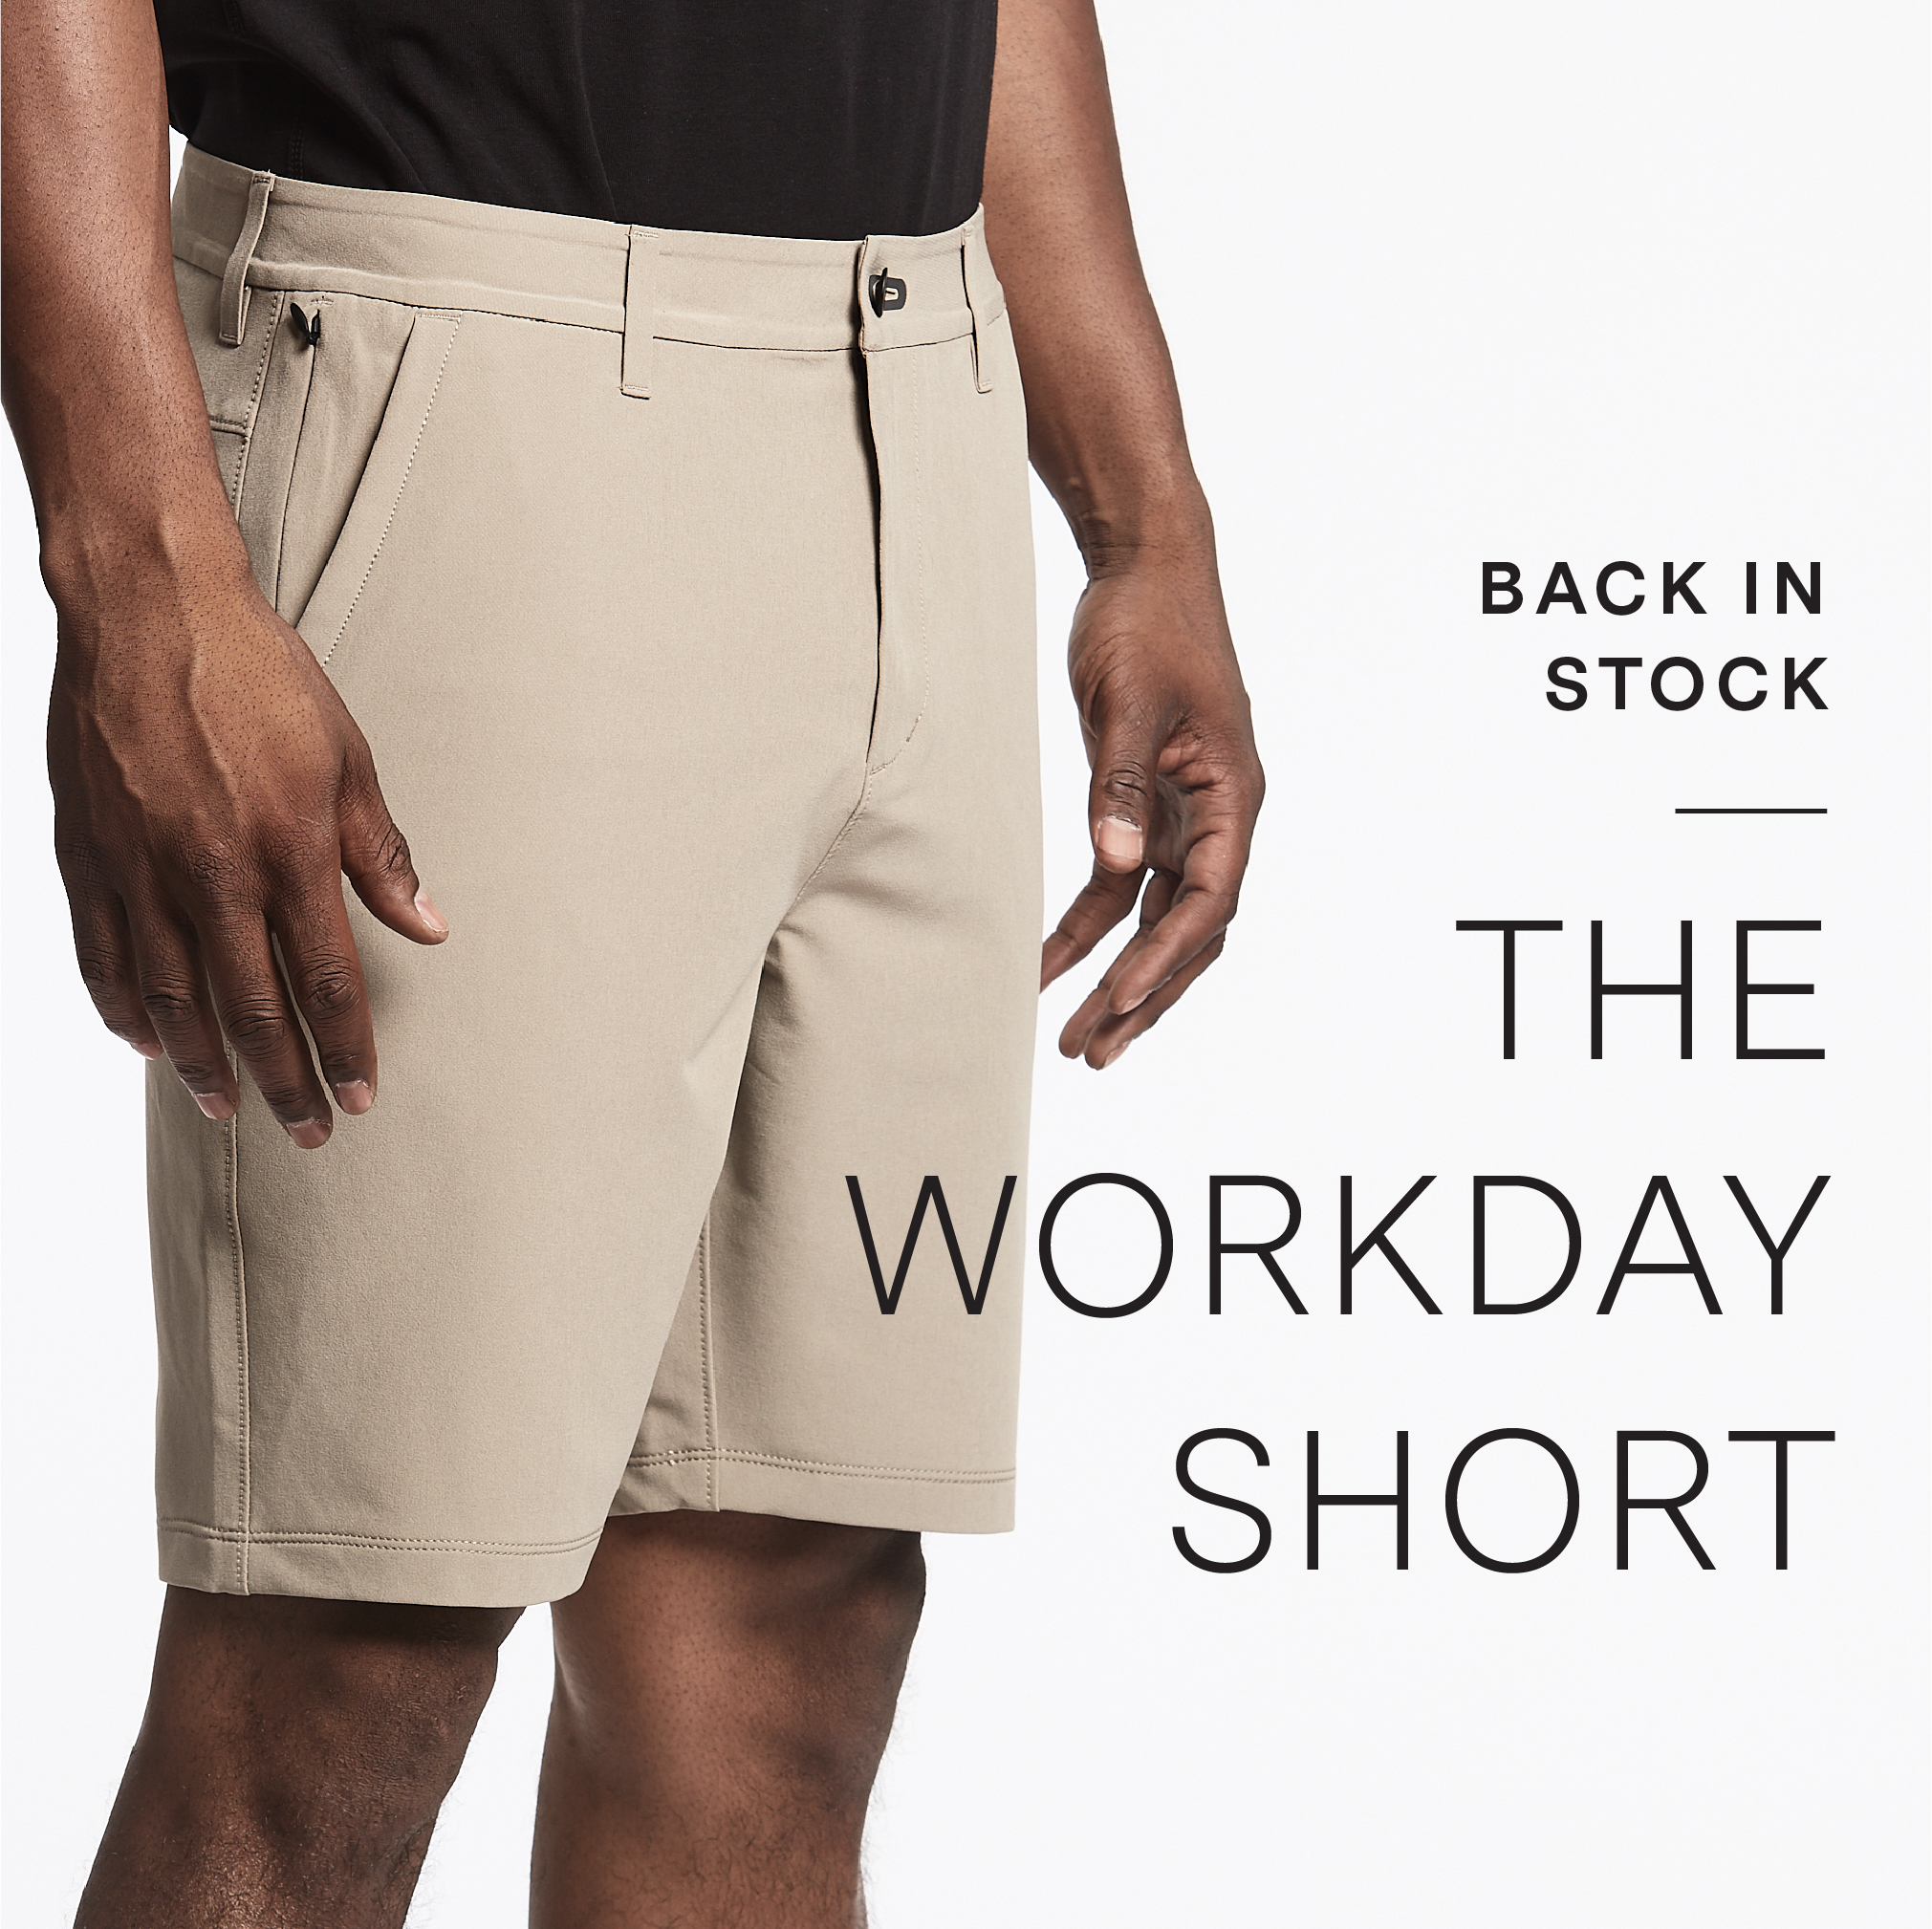 BACK IN STOCK - THE WORKDAY SHORT